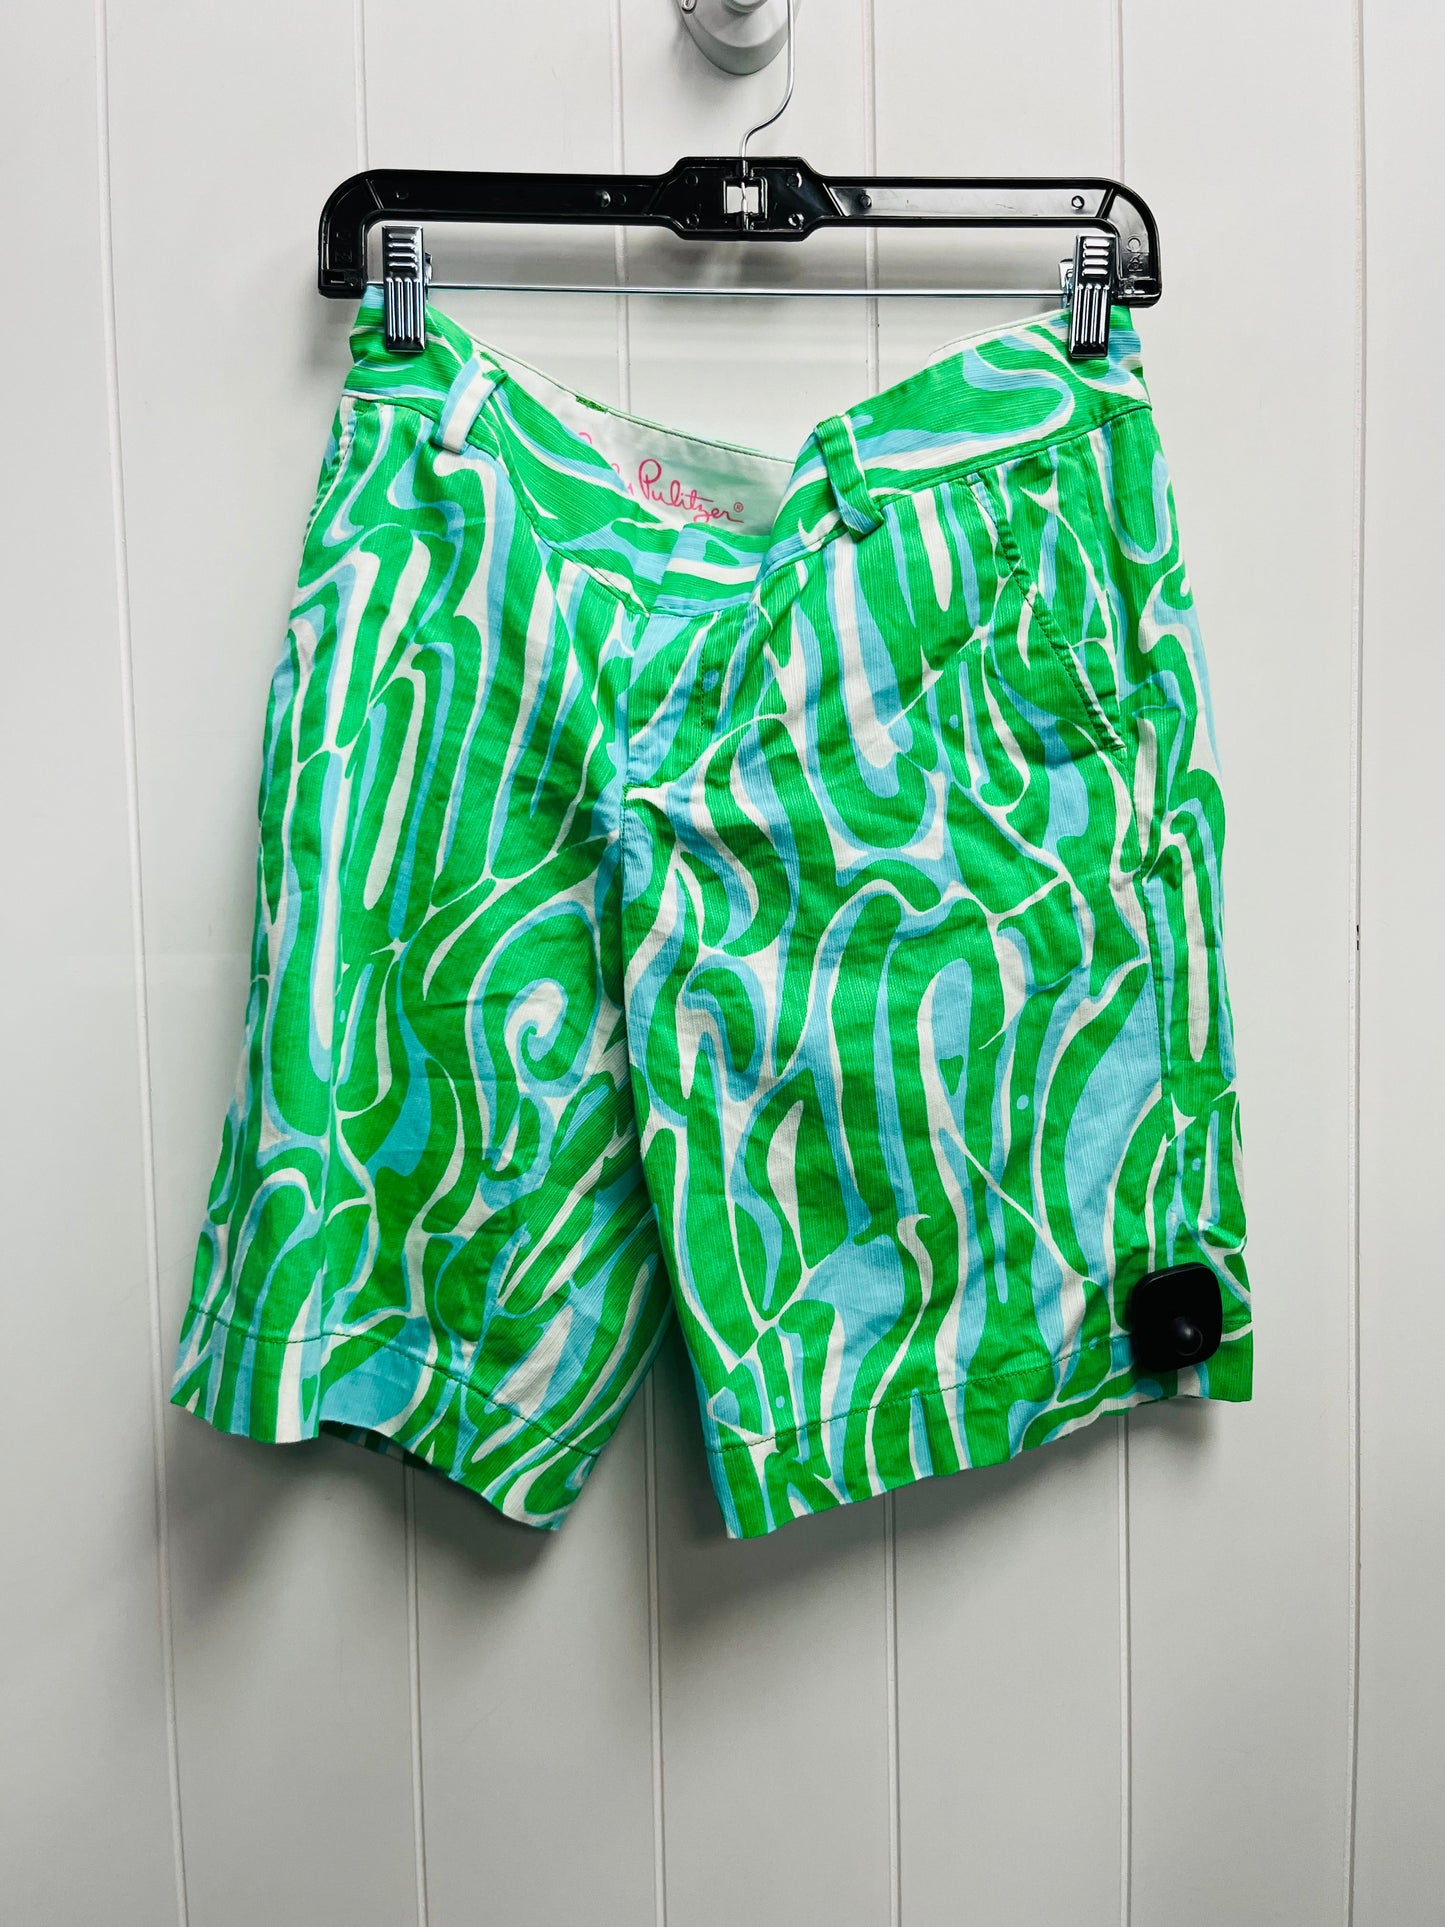 Green Shorts Lilly Pulitzer, Size 6